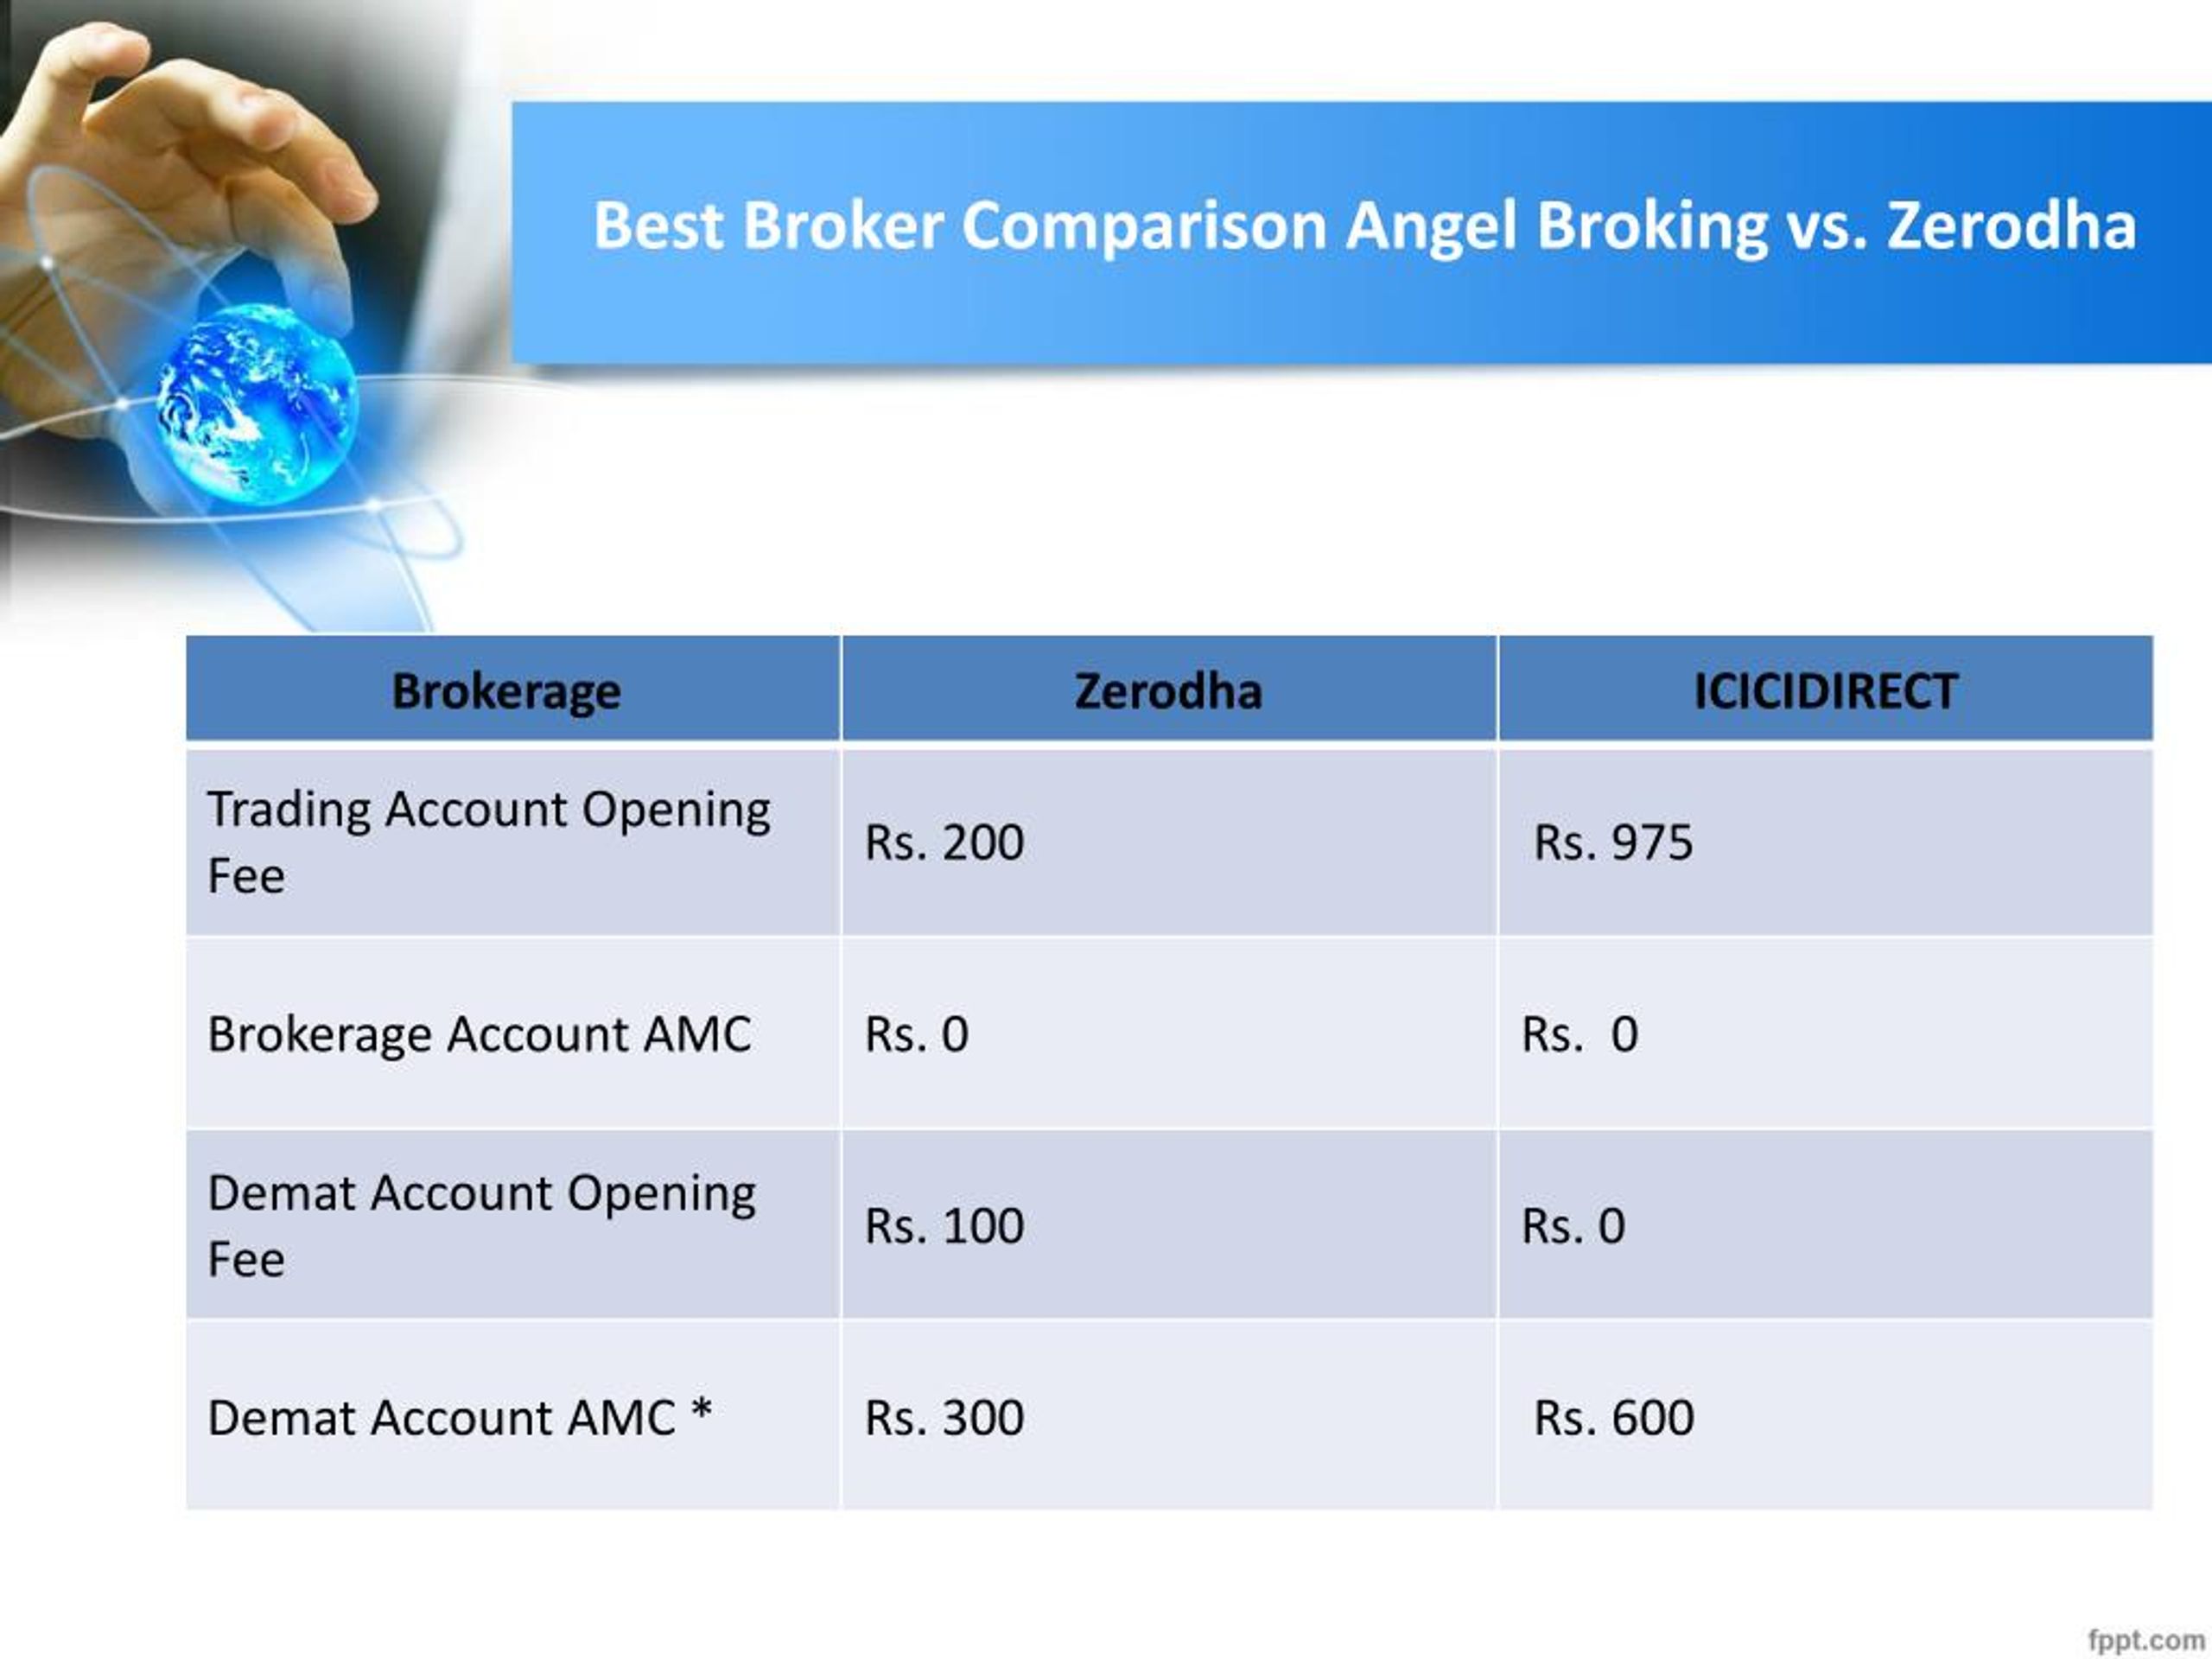 Ppt Compare Zerodha Vs Angel Brokerage Charges Investallign Powerpoint Presentation Id7823736 1949